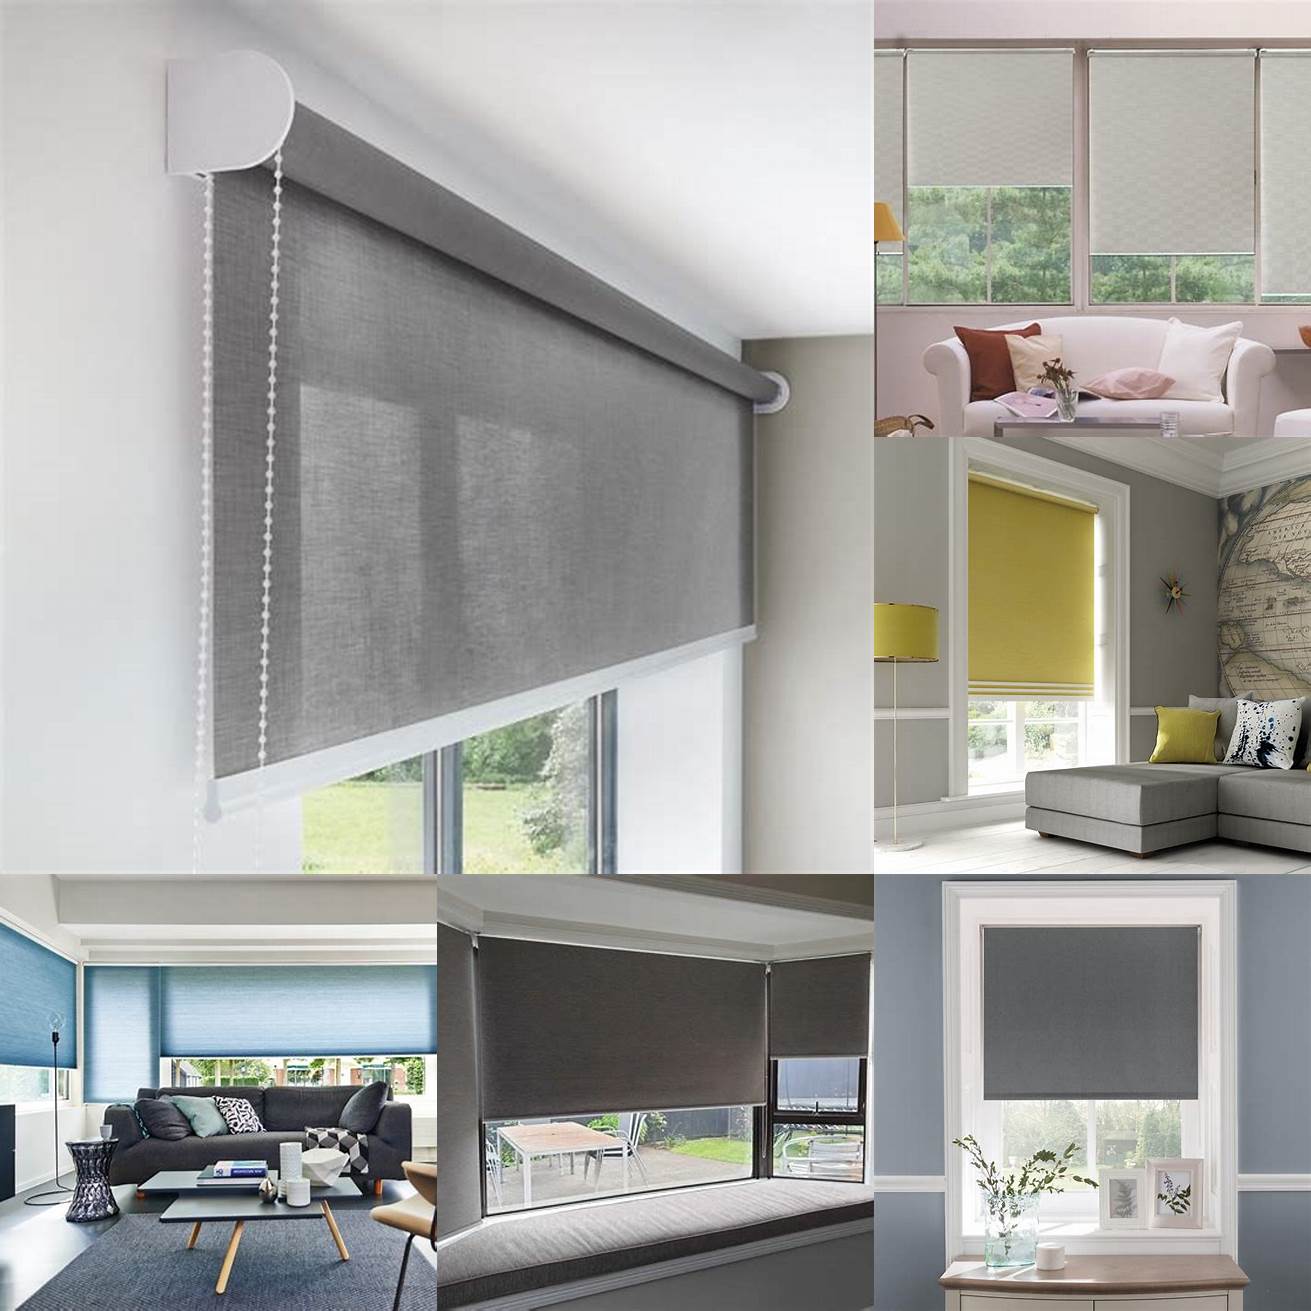 Standard Roller Blinds The most common type of roller blinds made of a single piece of fabric that rolls up and down on a metal tube